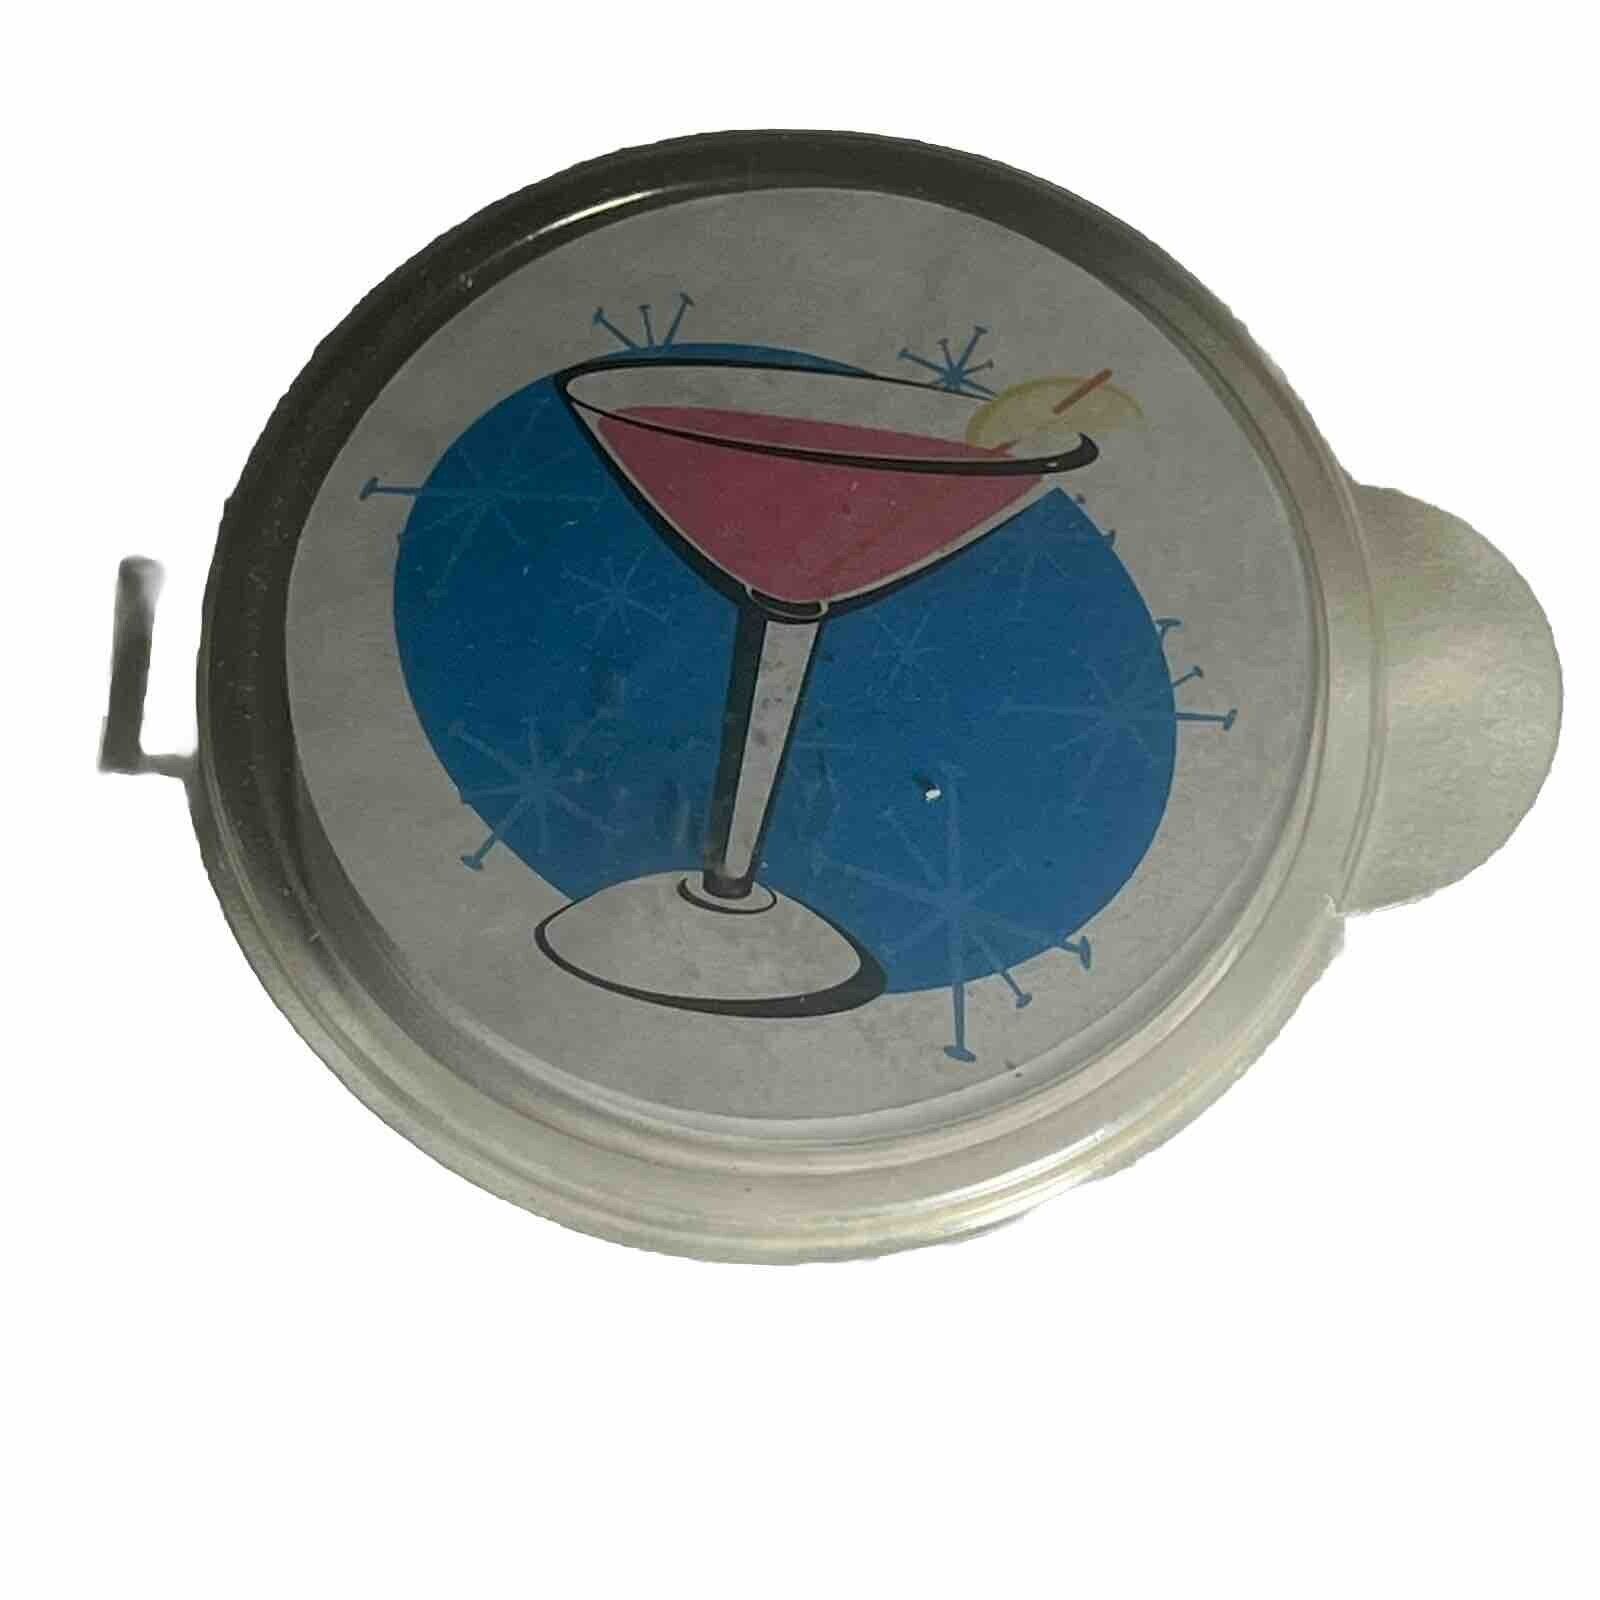 Vtg MCM Retro Playing Cards Unique Round Martini Glass Girls Night Out, Nvr Used